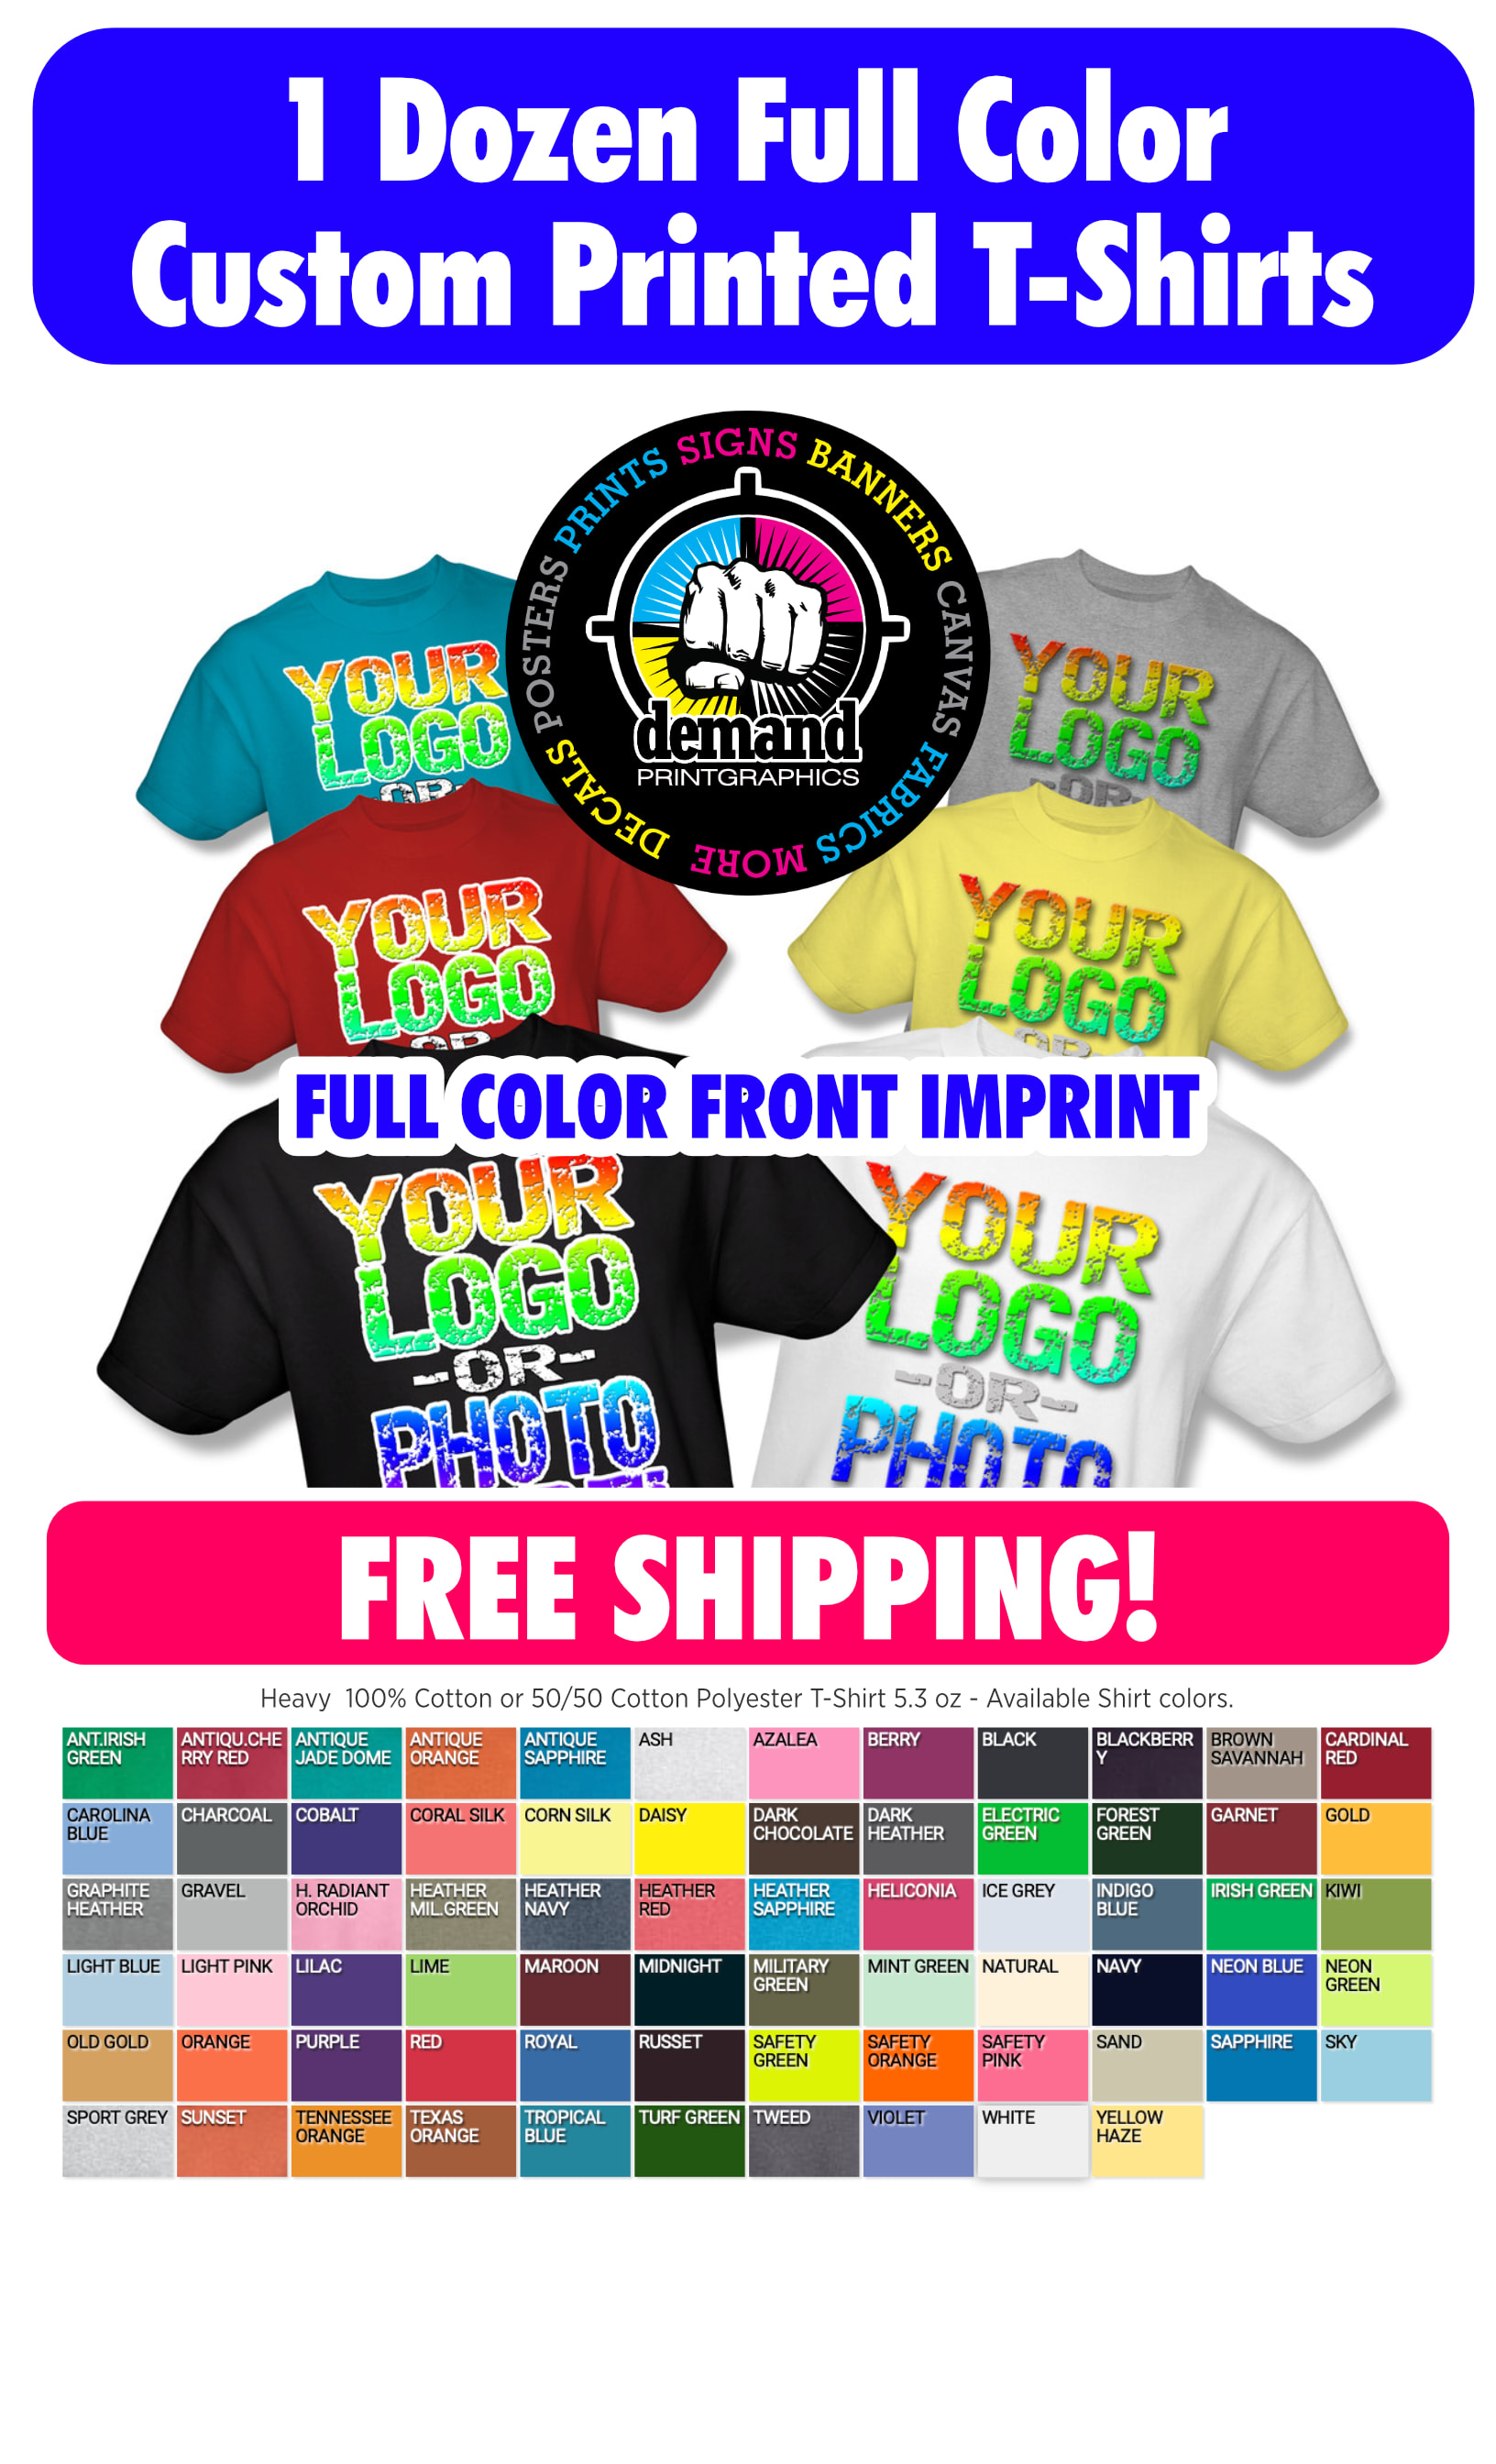 Custom T-shirts  Personalize & Order Prints from Canva